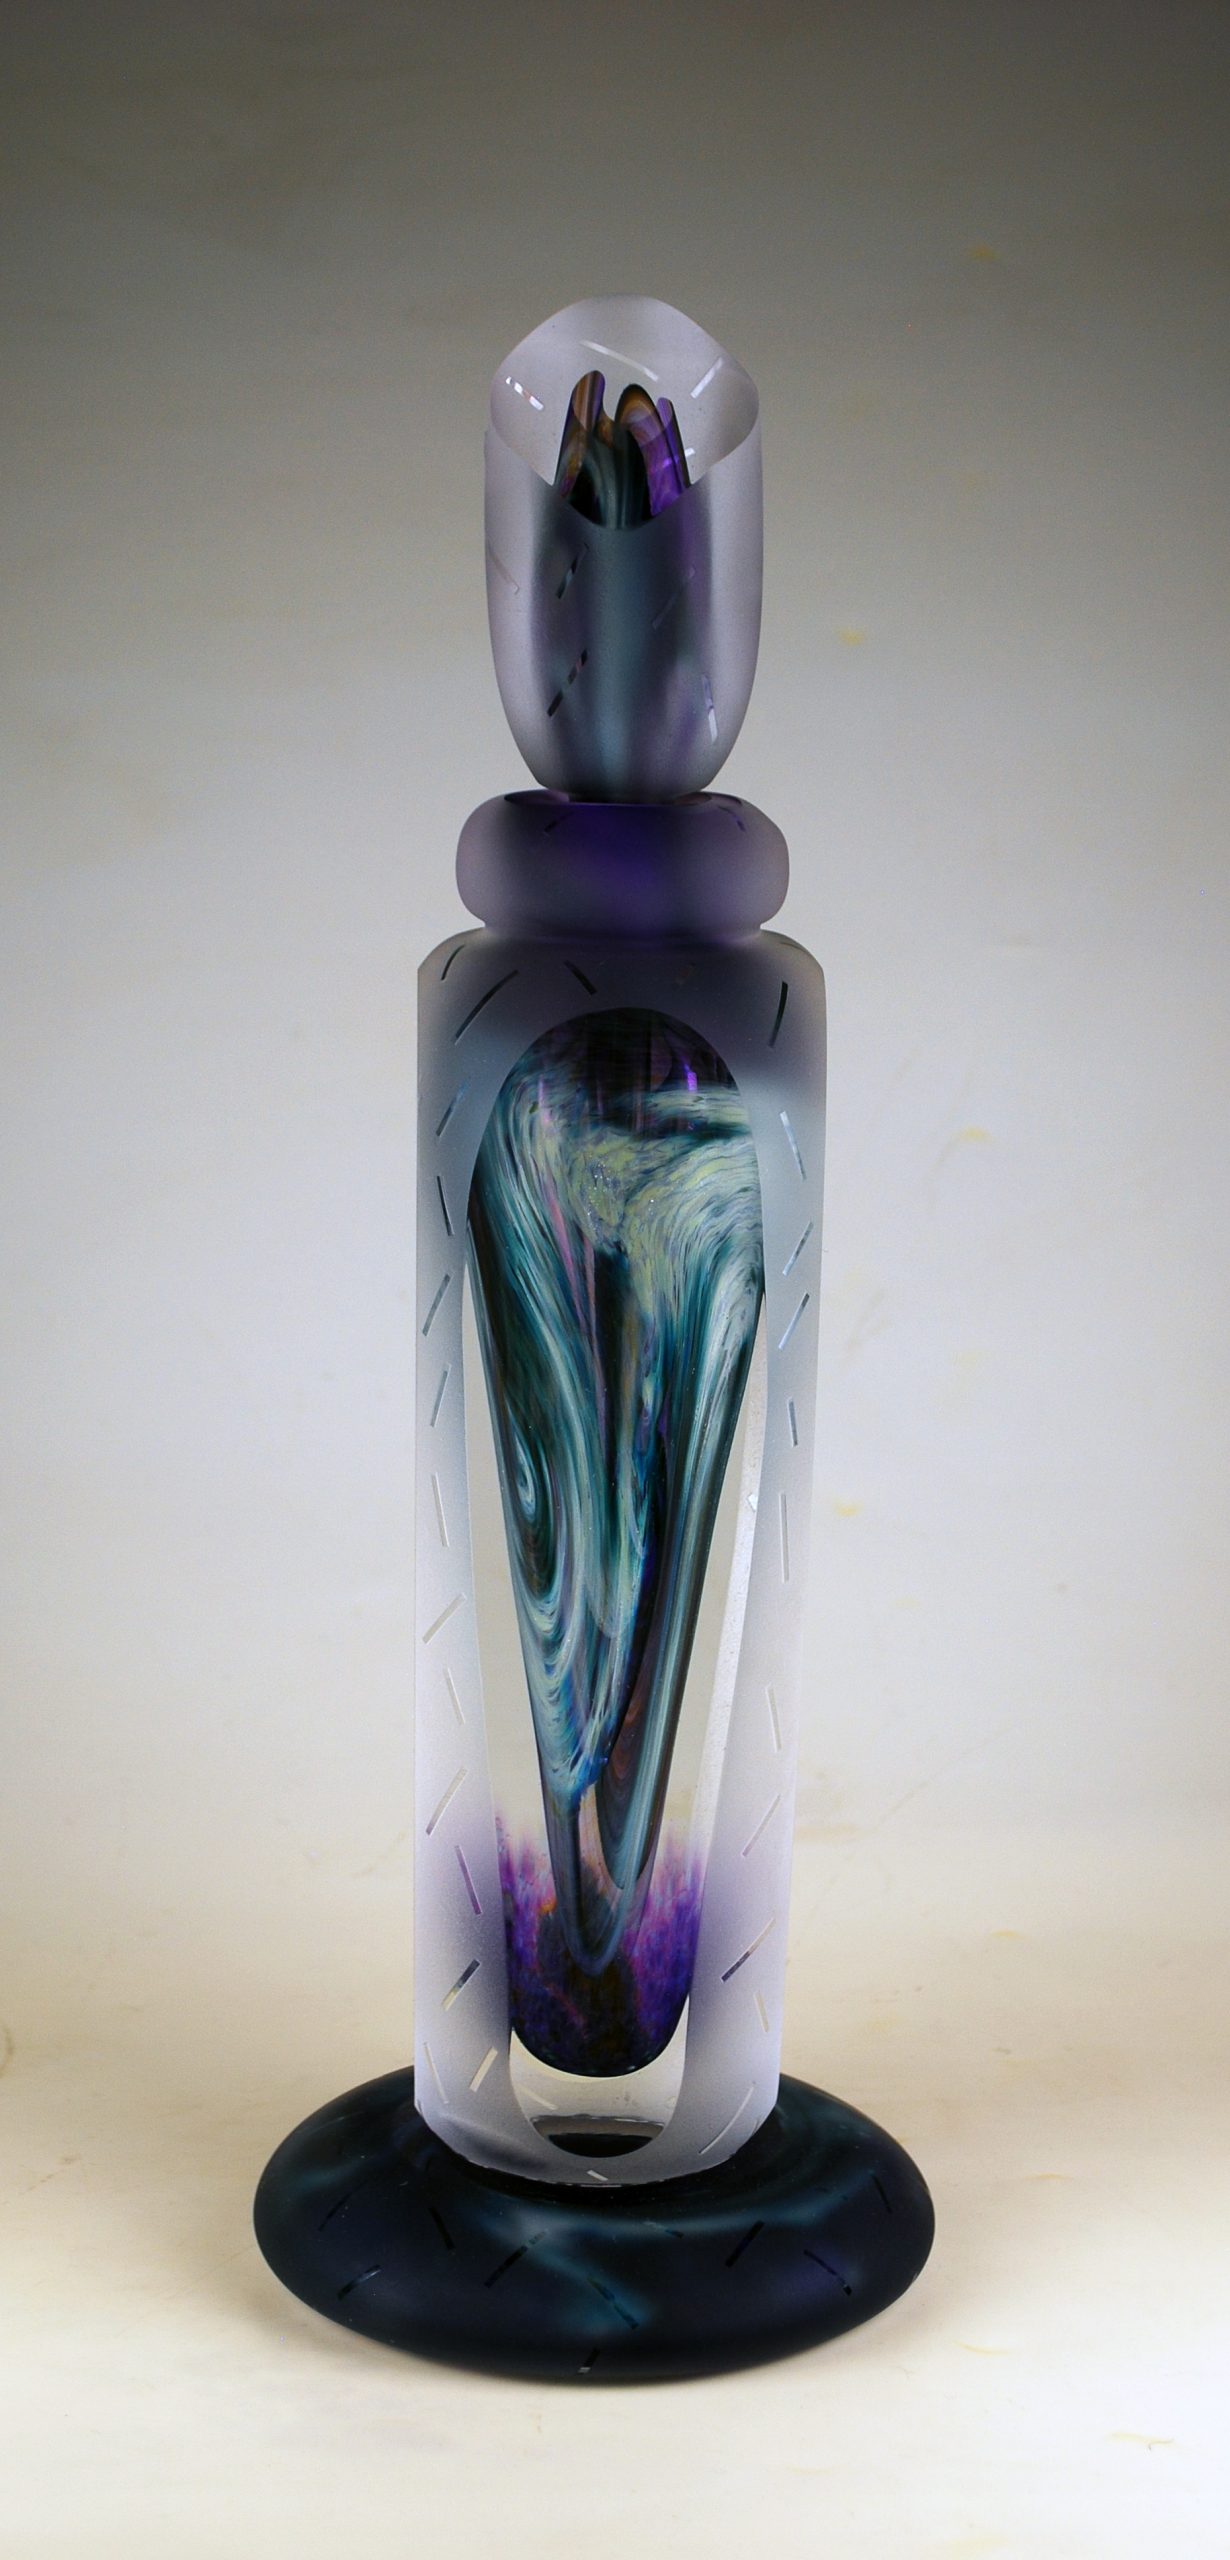 Andrew Shea, Large Amethyst Perfume Bottle, 2018, blown glass, 16x5.5x5.5 inches, collection of the artist
